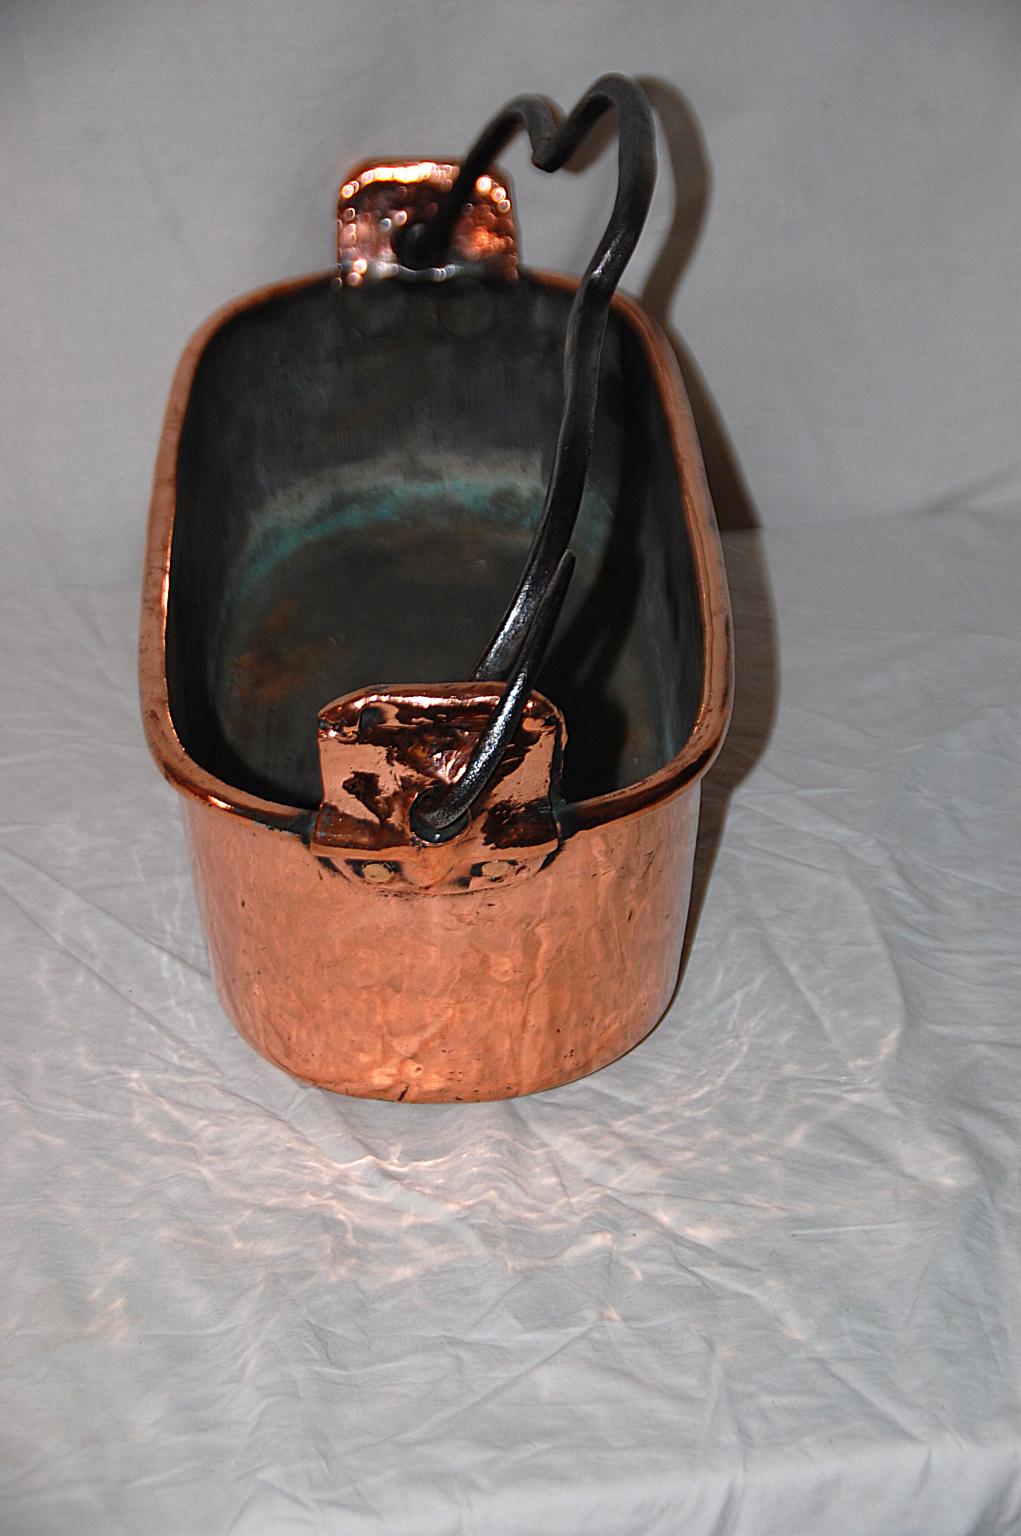 French early 19th century copper dovetailed fish poacher with iron swing handle. The copper is of heavy gauge and of dovetailed construction. The wrought iron swing handle has had a professional repair, and it is now ready for the next generation of